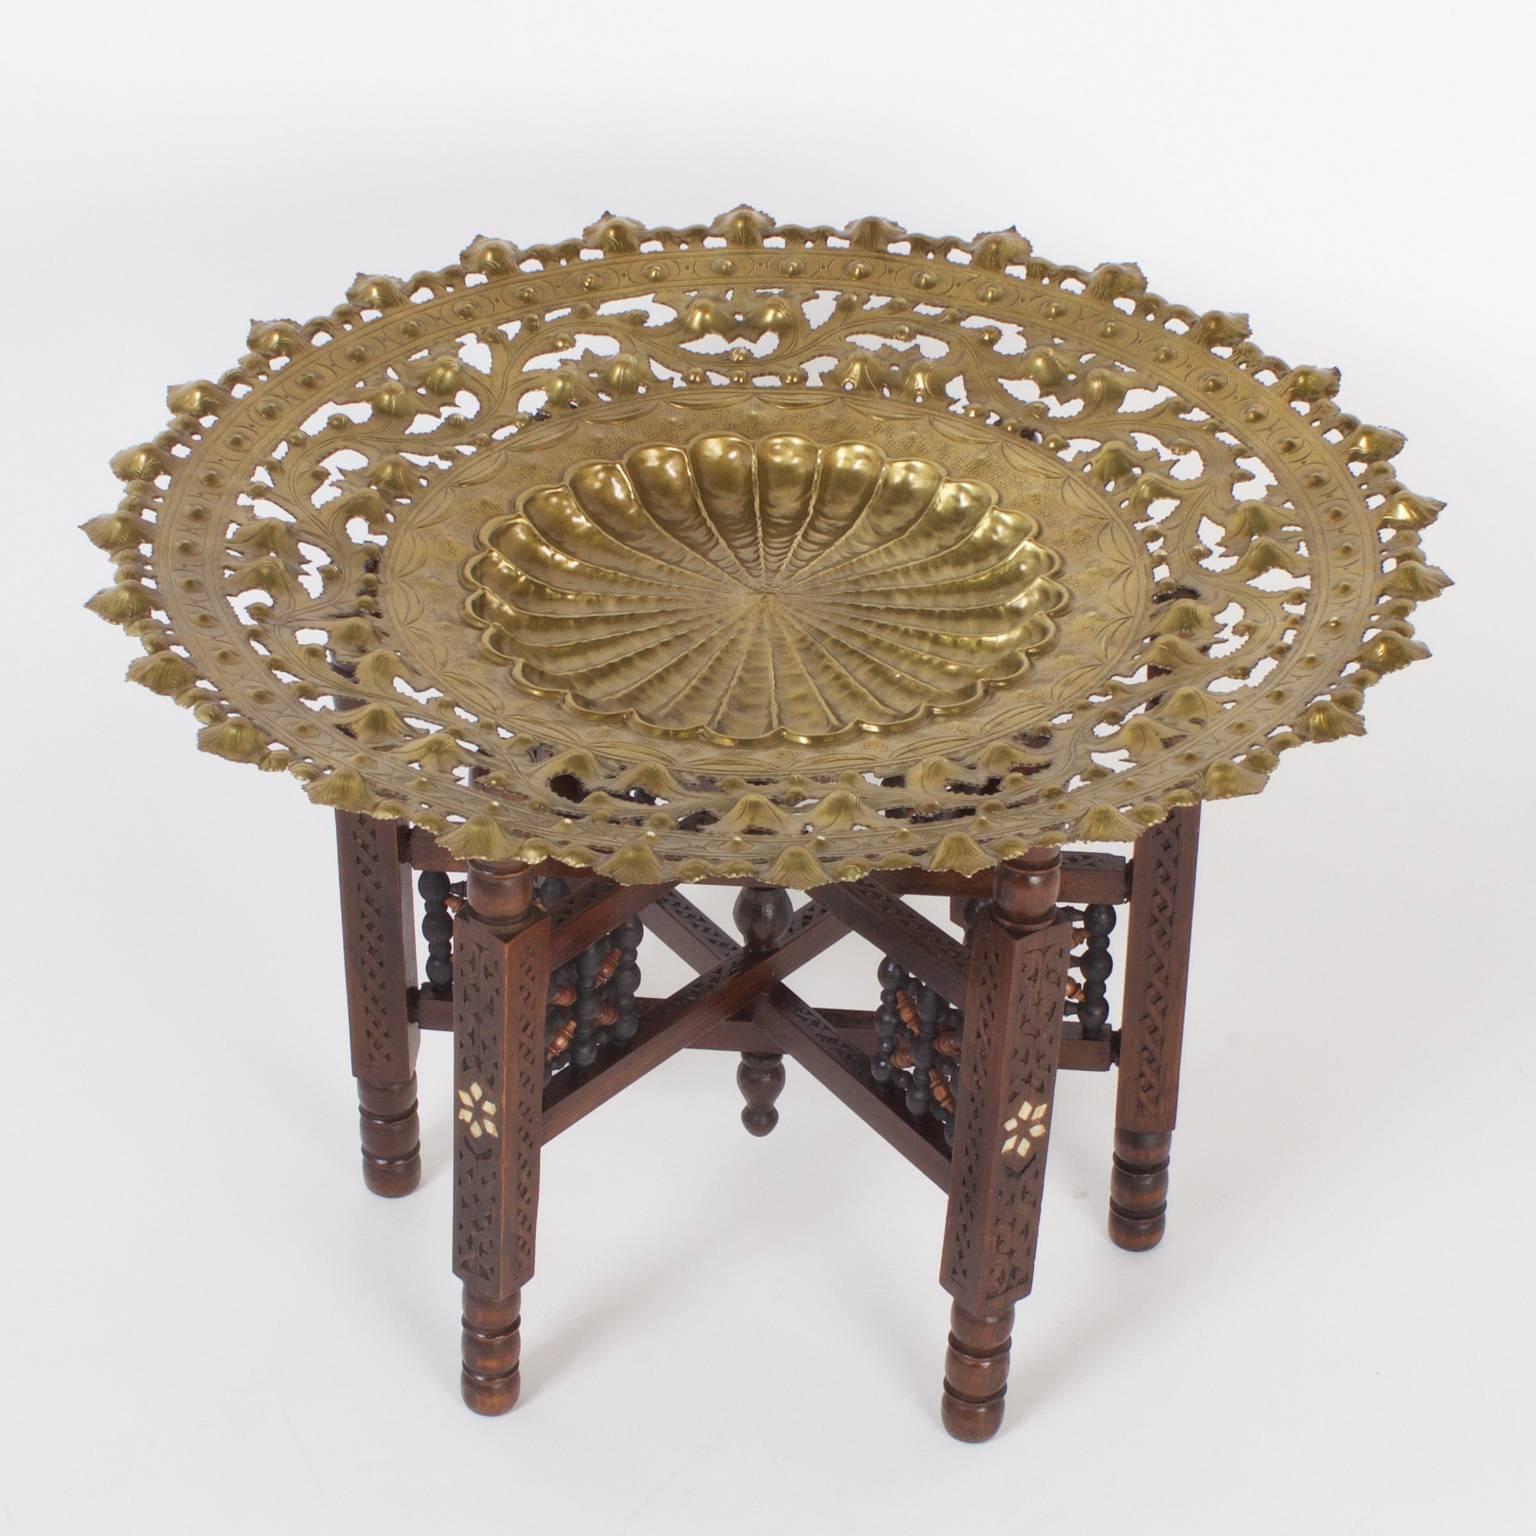 Moroccan tray, coffee or cocktail table with a hand hammered removable brass tray, featuring floral and geometric designs crafted with open filigree and old world charm. The base has carved, turned legs, inlaid bone and stick and ball supports.